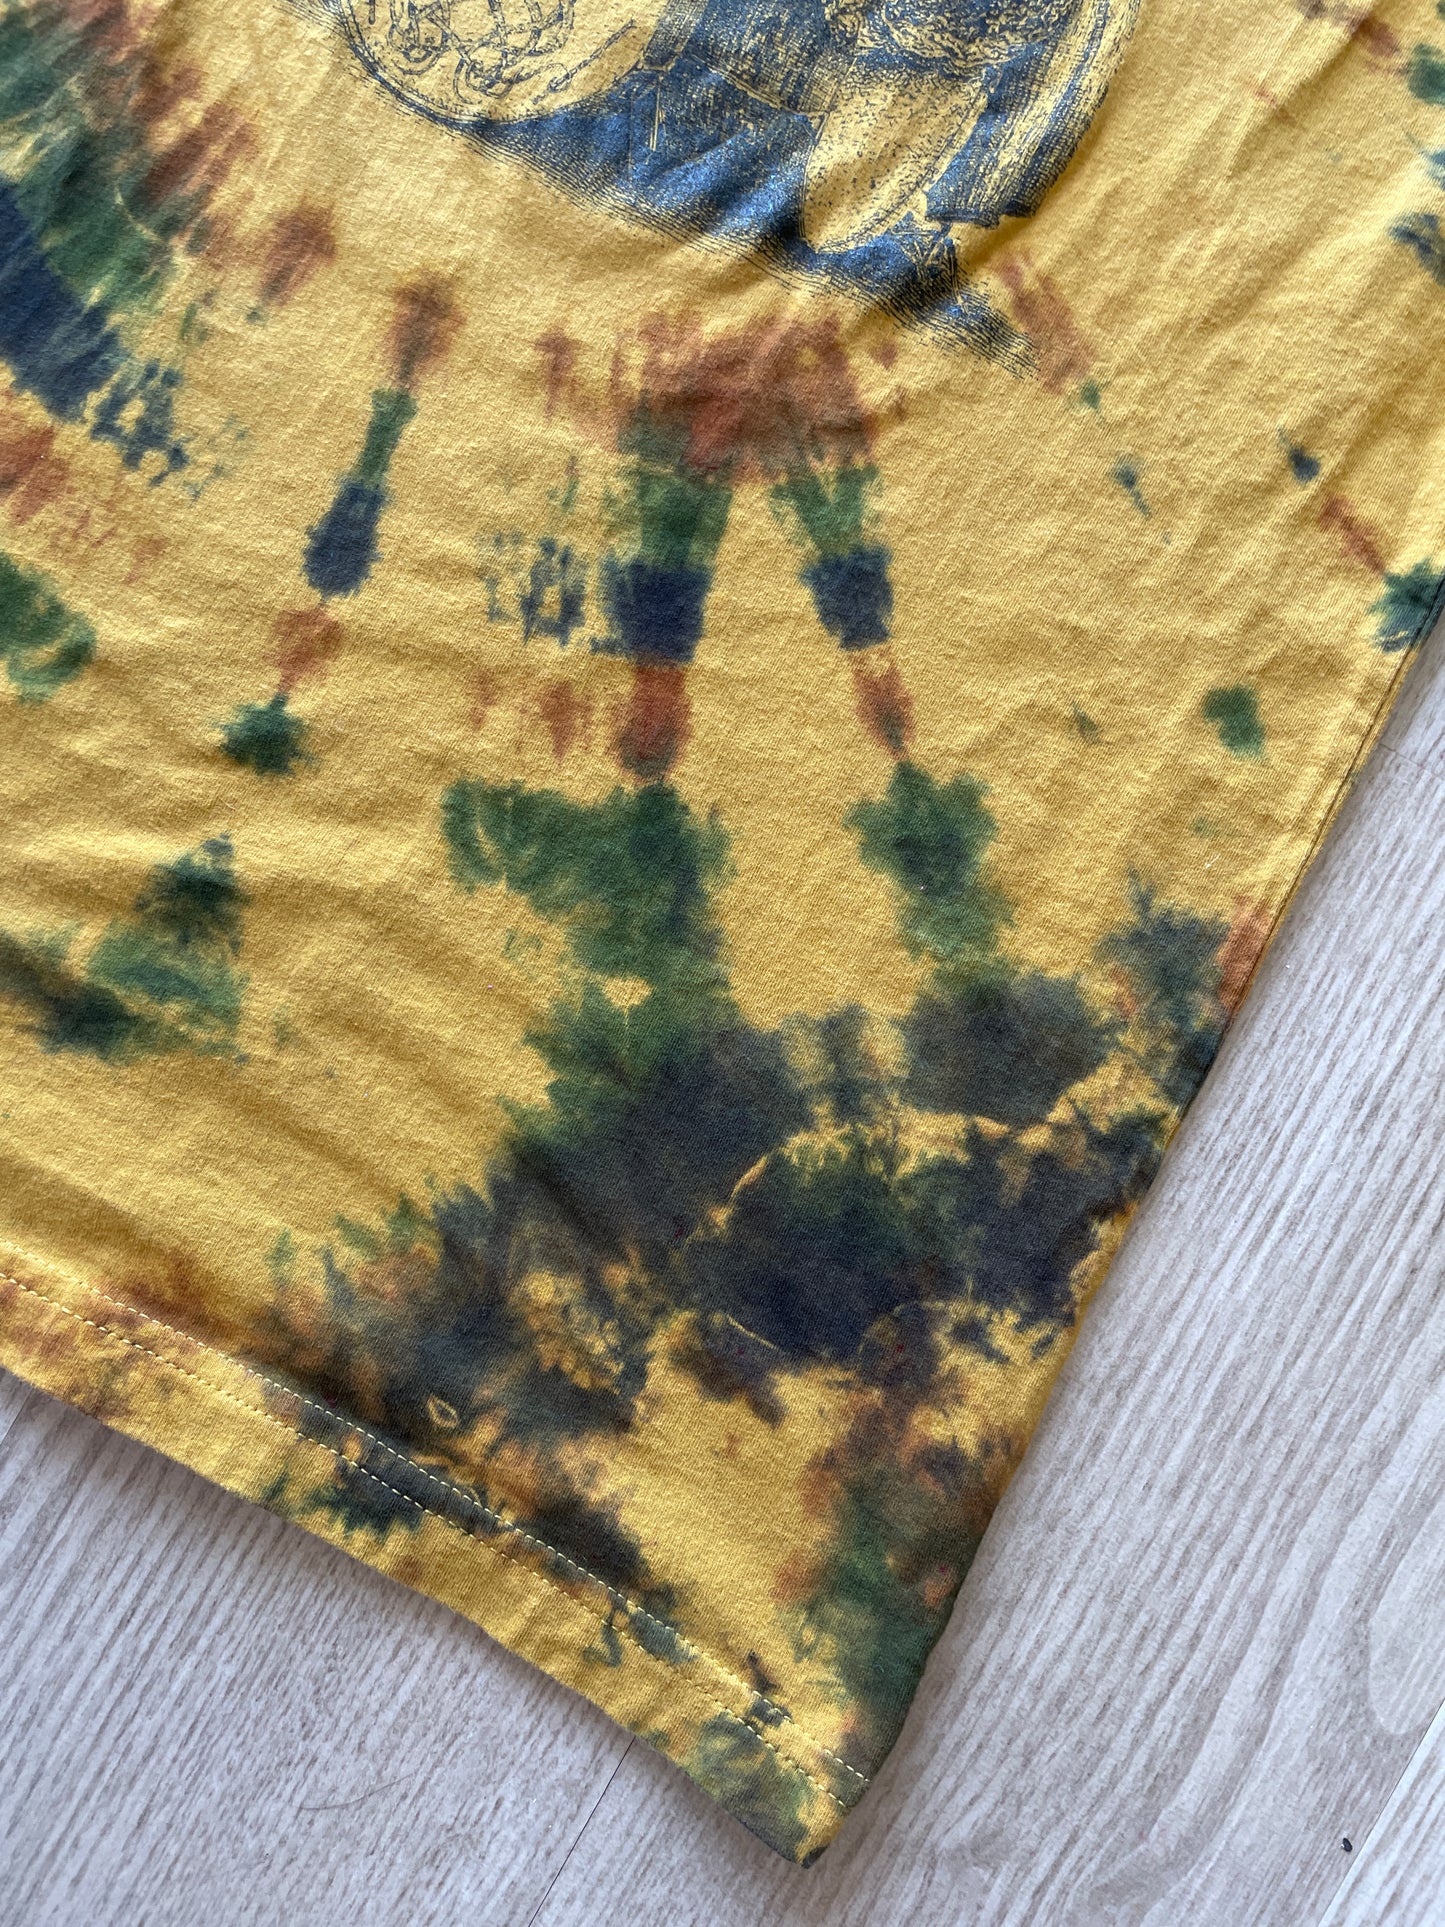 MEDIUM Men’s Yellow Octo-drummer Handmade Tie Dye T-Shirt | One-Of-a-Kind Yellow and Brown Short Sleeve